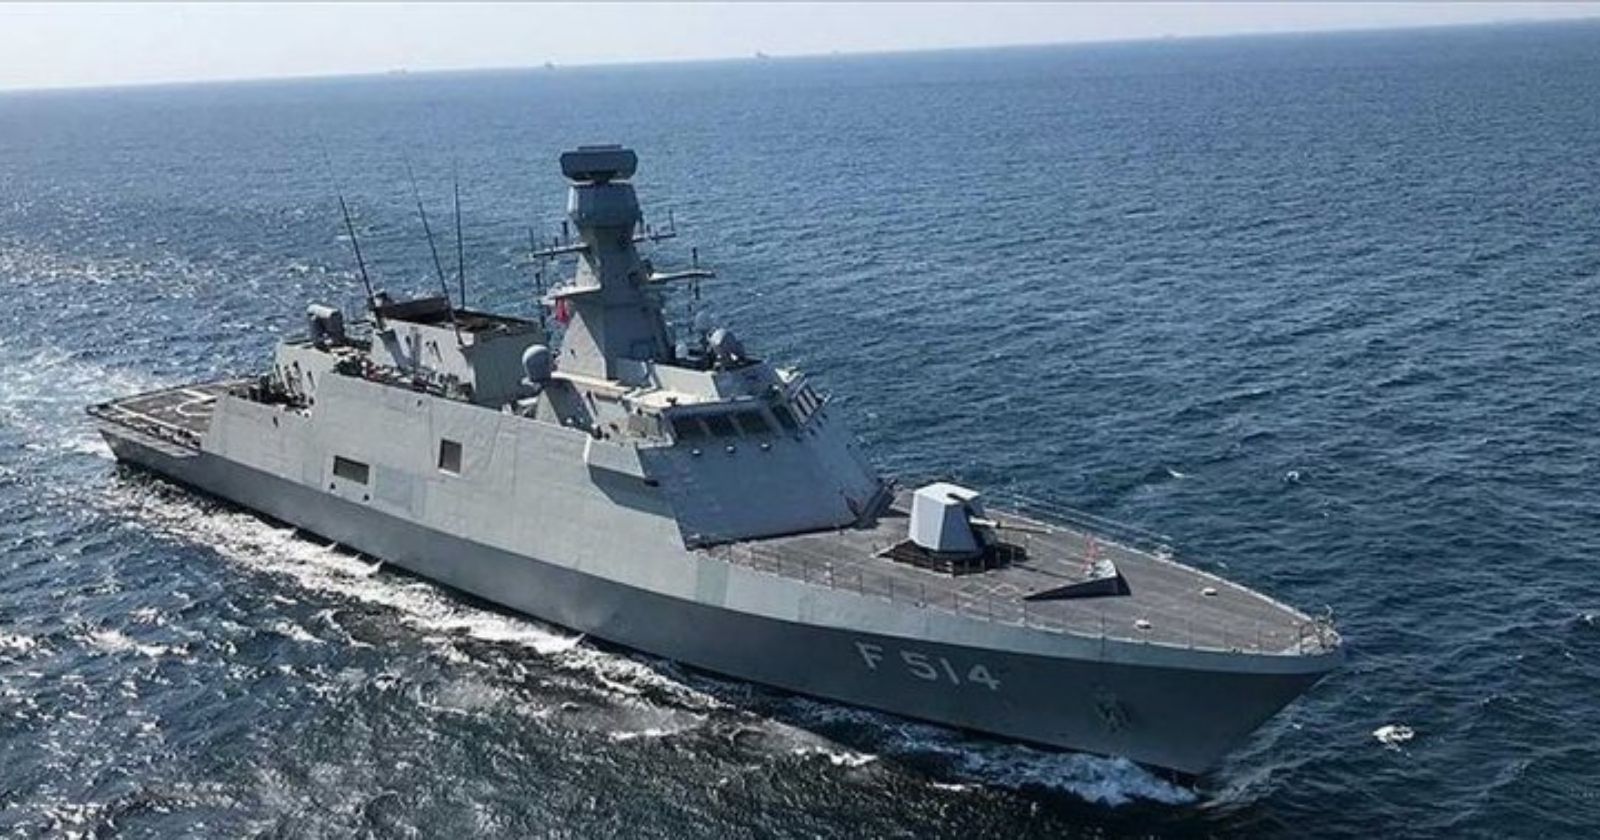 Turkey’s newest corvette, TCG KINALIADA, is on its way to Japan for a 134-year mission!